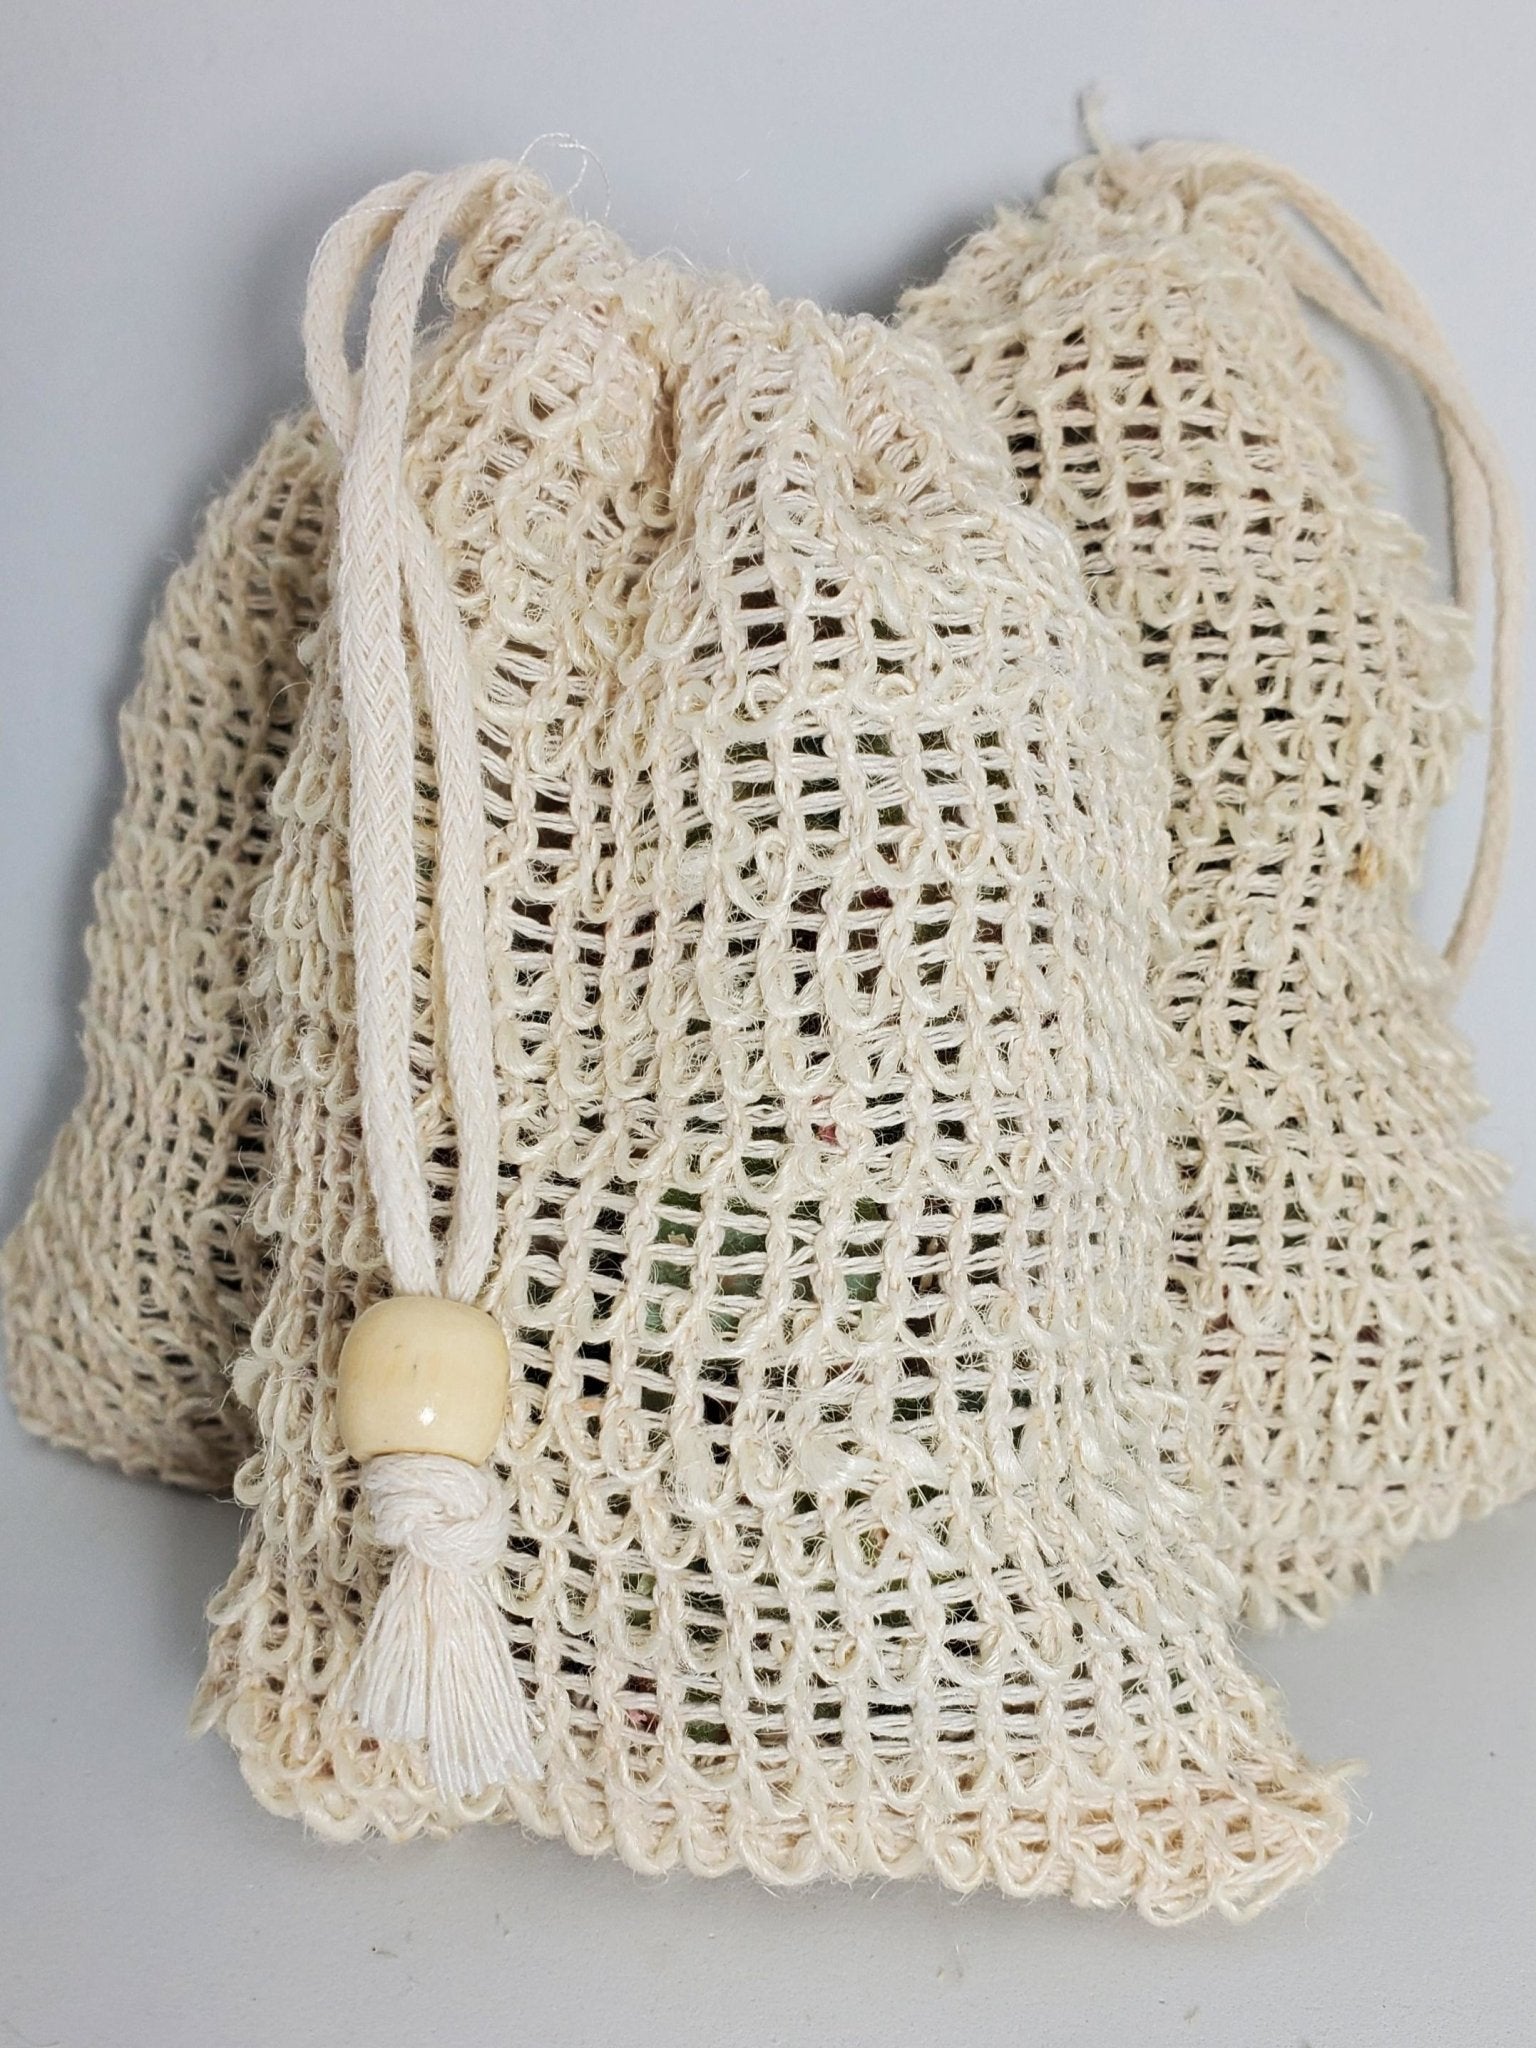 soap sac with soap chunks included